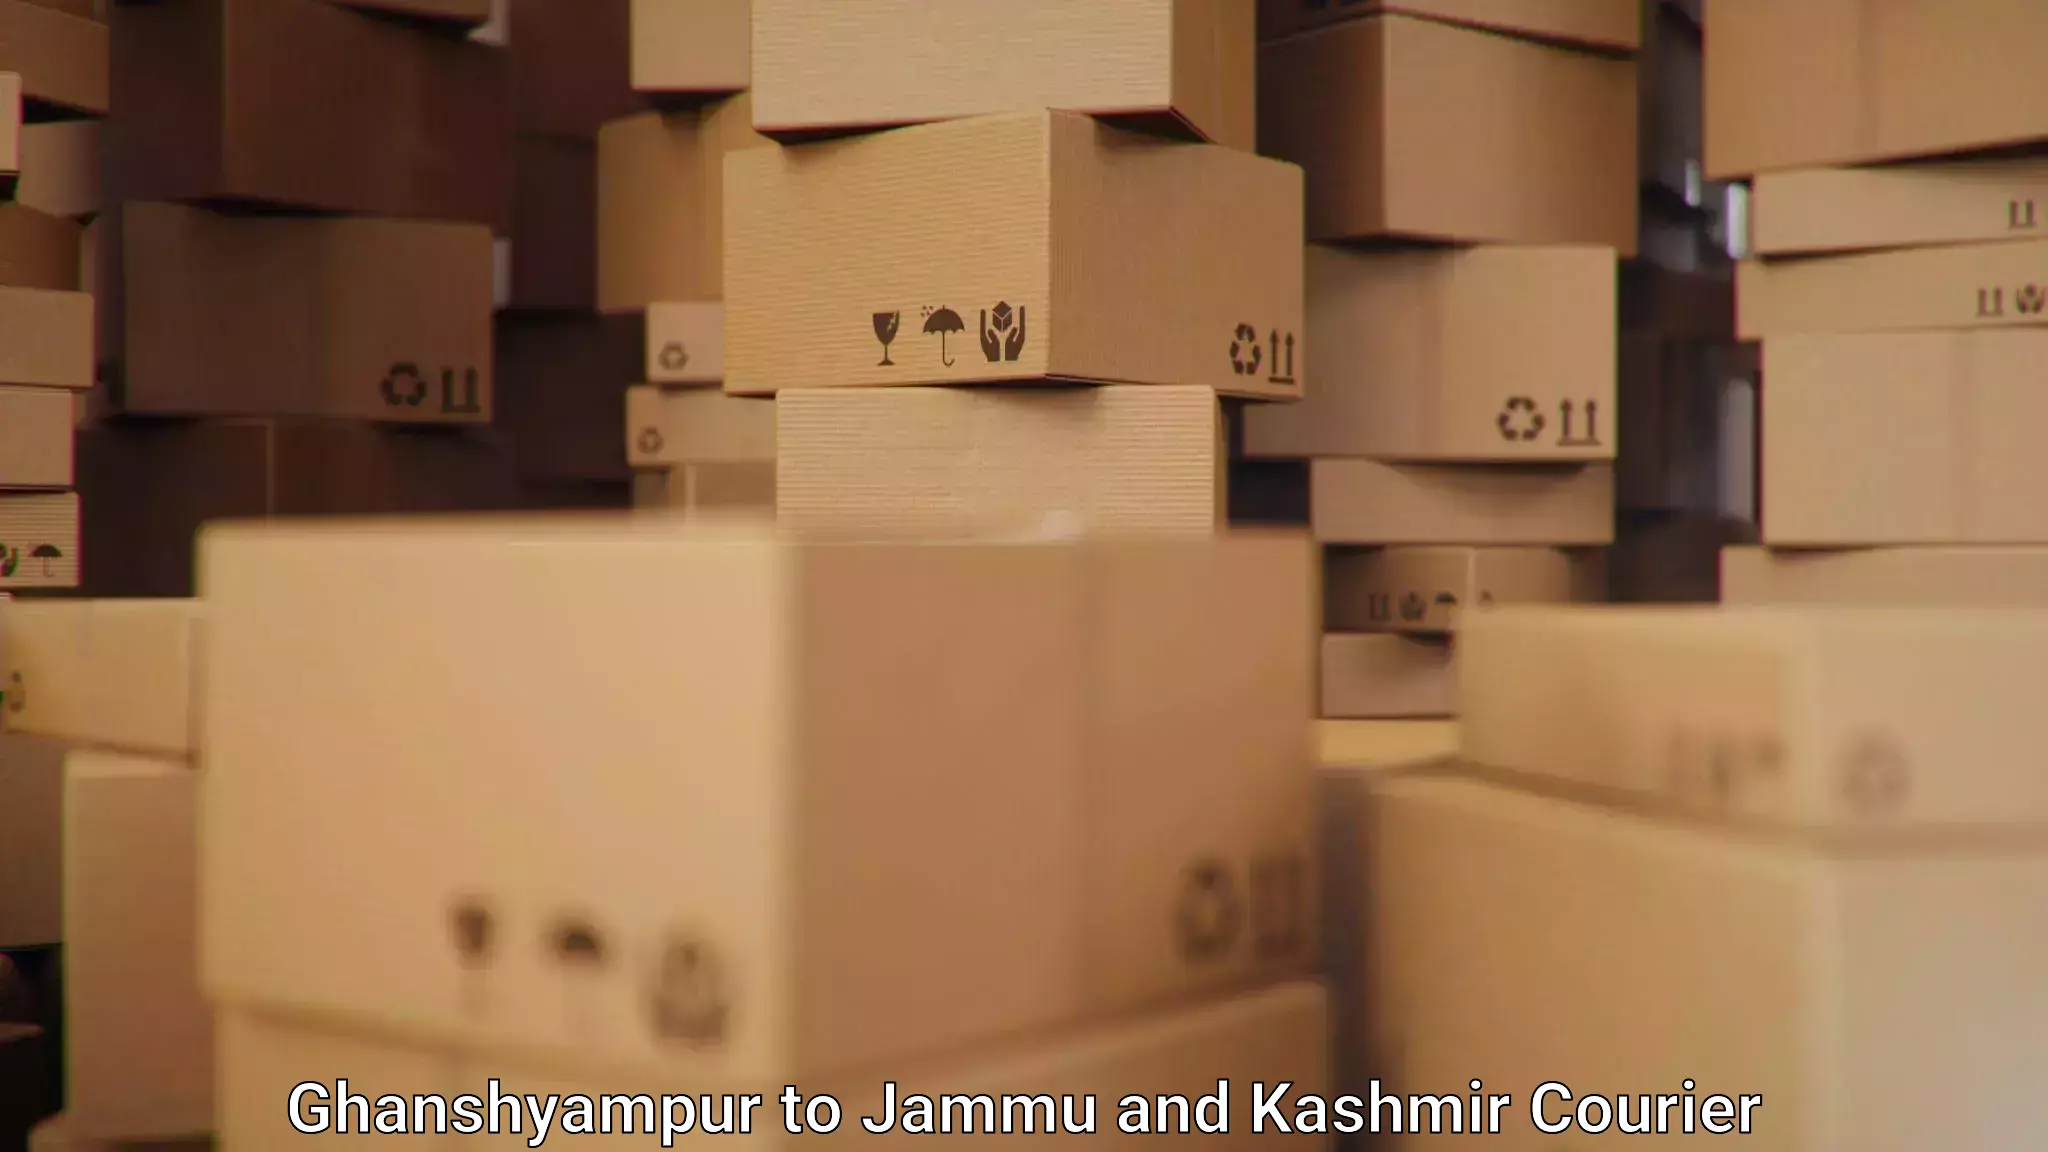 Nationwide parcel services Ghanshyampur to Shopian